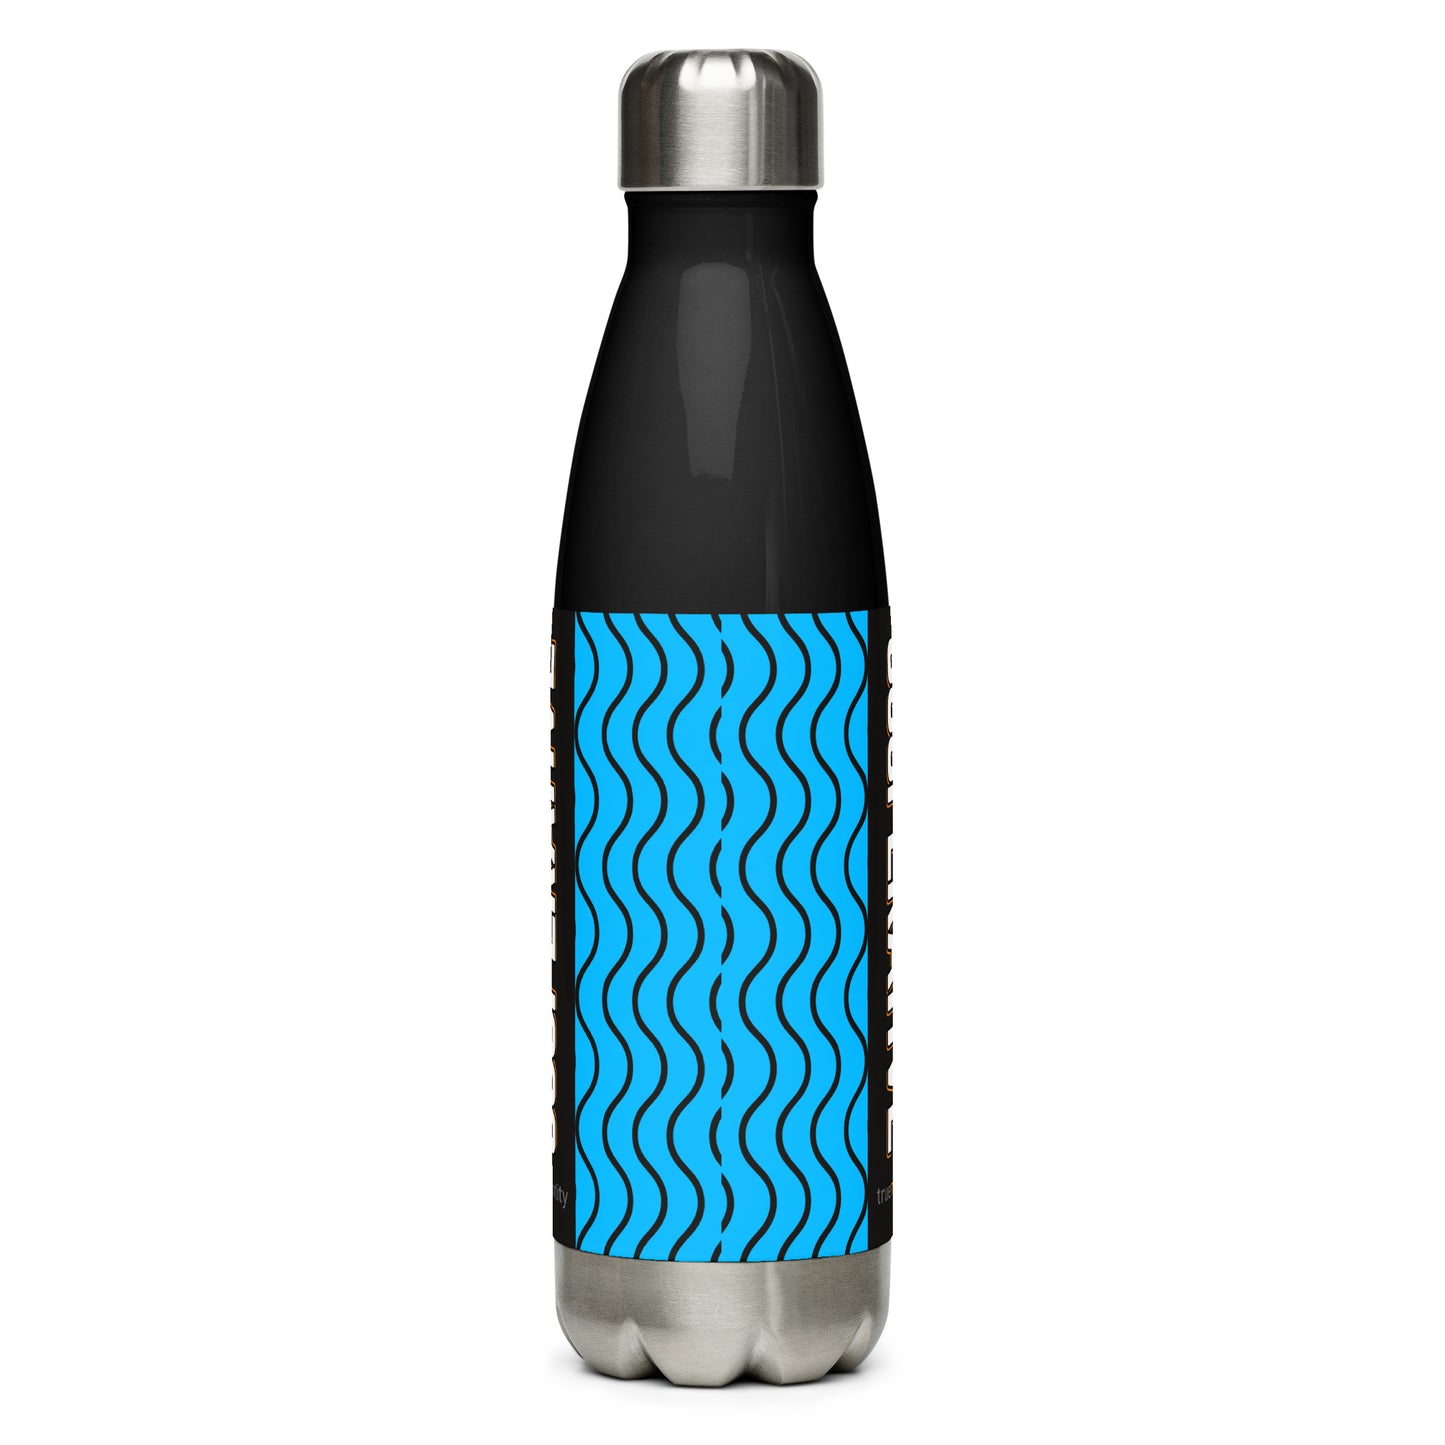 COOPERATIVE Stainless Steel Water Bottle Blue Wave Design, 17 oz, in Black or White